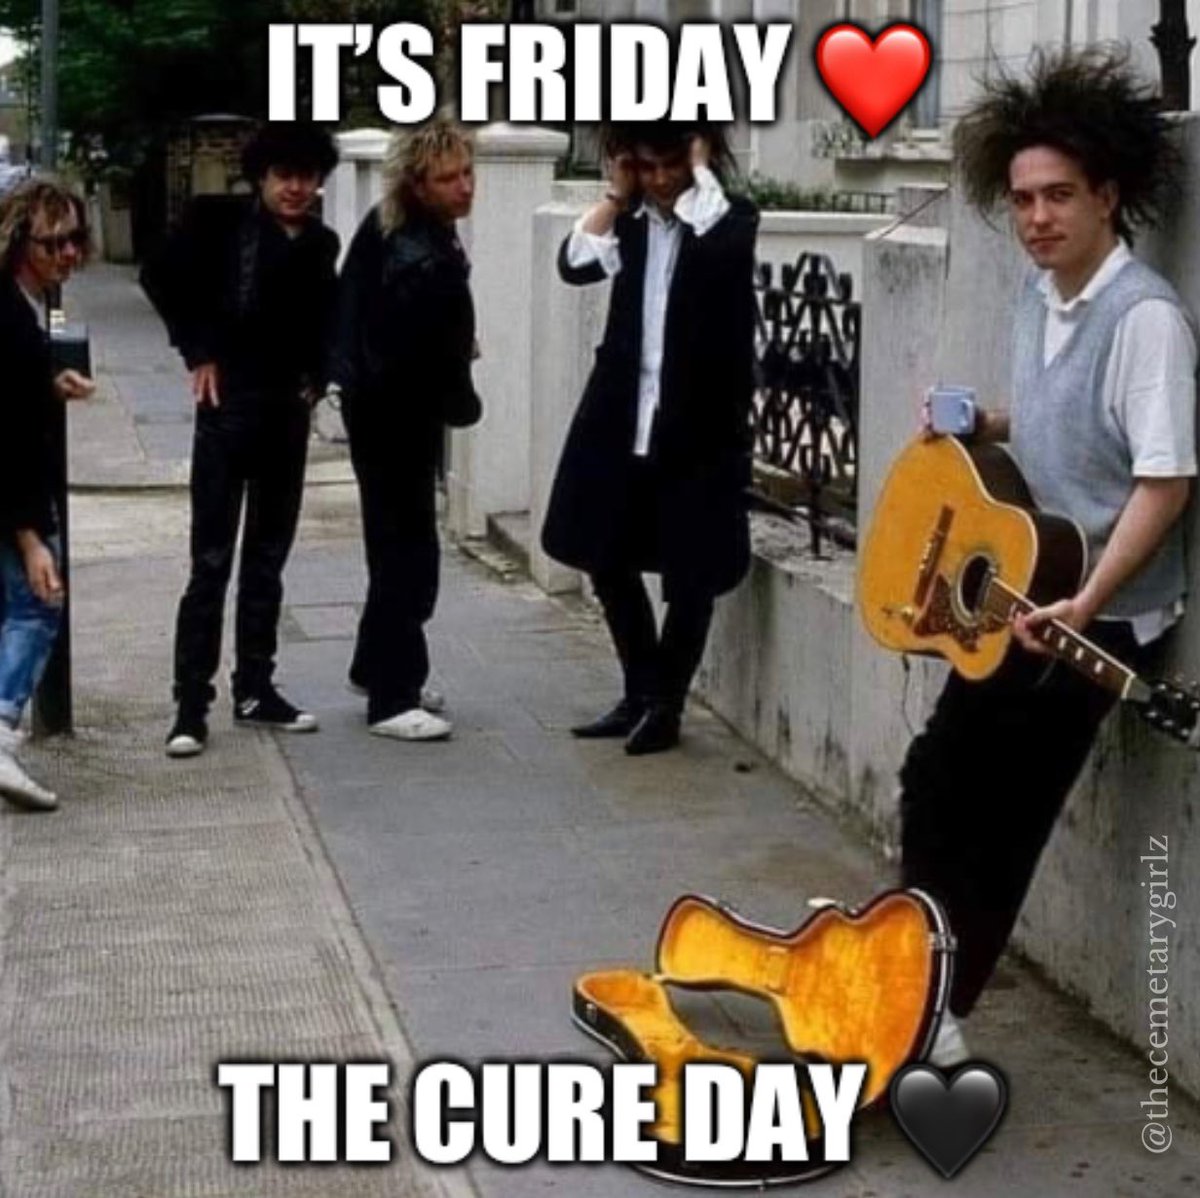 It’s Friday witches youtu.be/mGgMZpGYiy8 Start your day with a cup of tea or coffee and a song from The Cure 🖤🦇 #thecure #thecureband #thecurememes #robertsmith #Friday #fridayiminlove #fridayiminlove❤️ #Friday #itsfridaybitches #Friday #itsfridaywitches